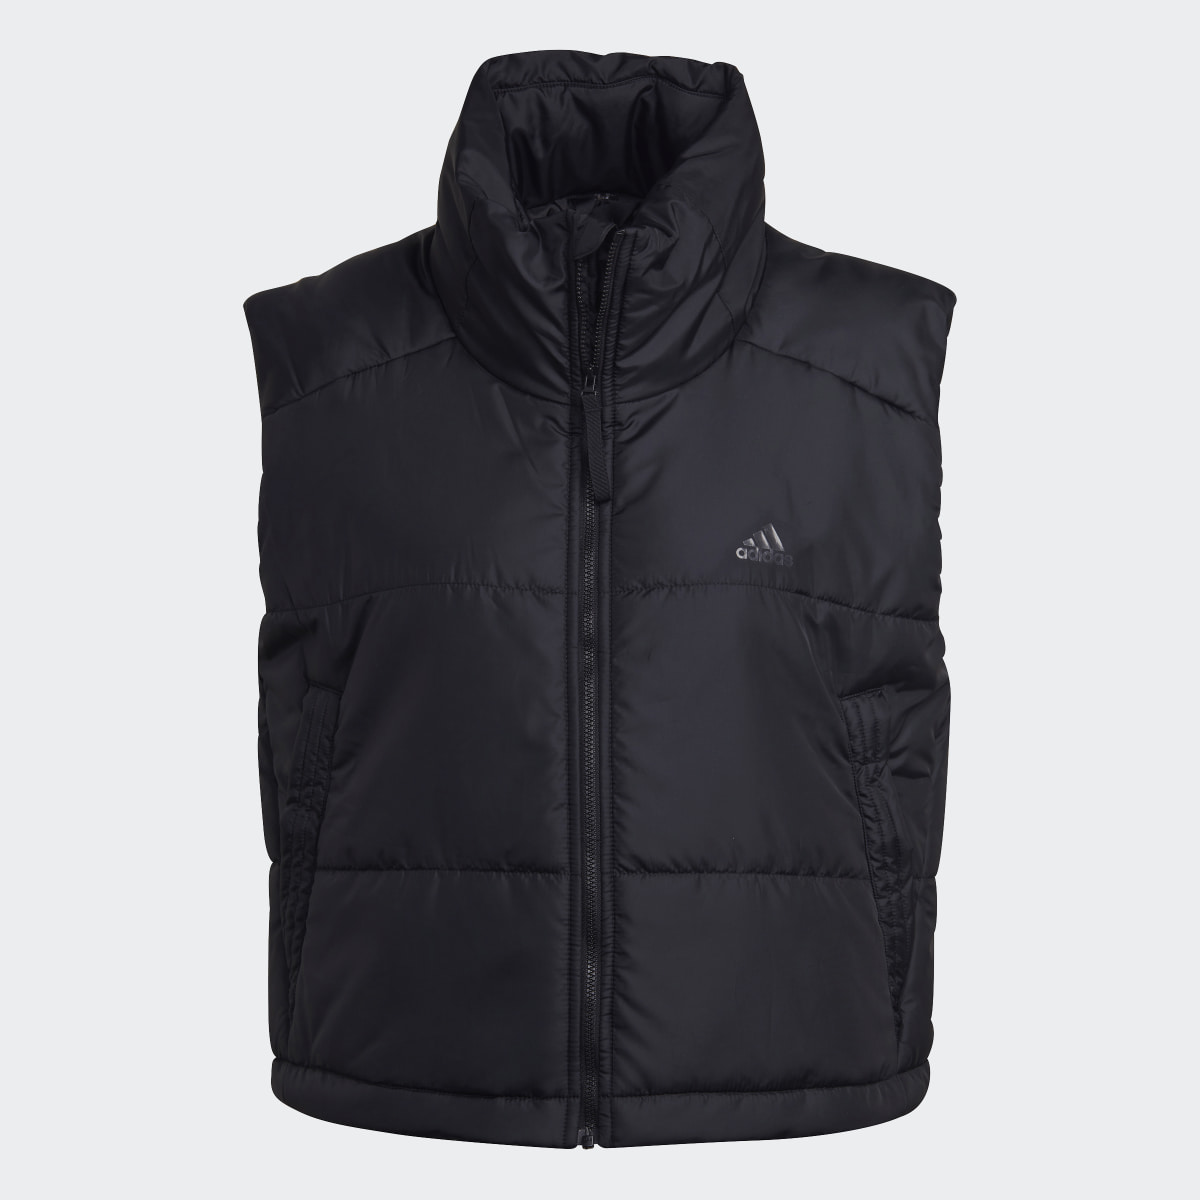 Adidas 3-Stripes Insulated Vest. 5